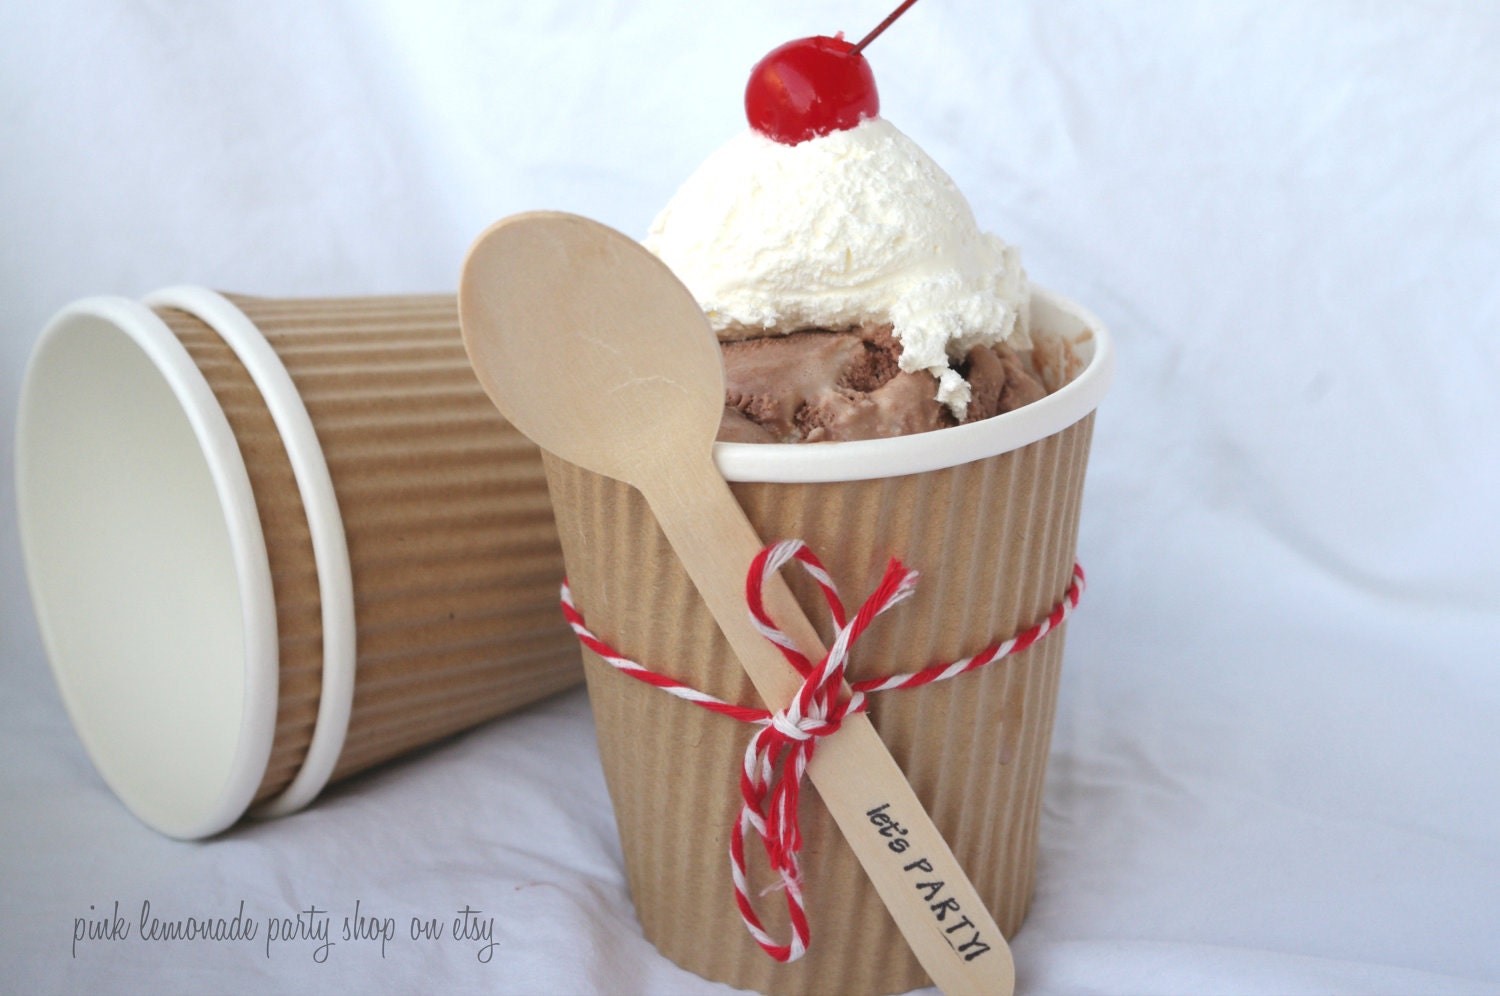 50LaRGe KRaFT PaPeR ICE CREAM CUPS16oz with DiY Printable Labels-Party Favors-Popcorn-Crafts-Ice Cream-Showers-Weddings- - pinklemonadeparty